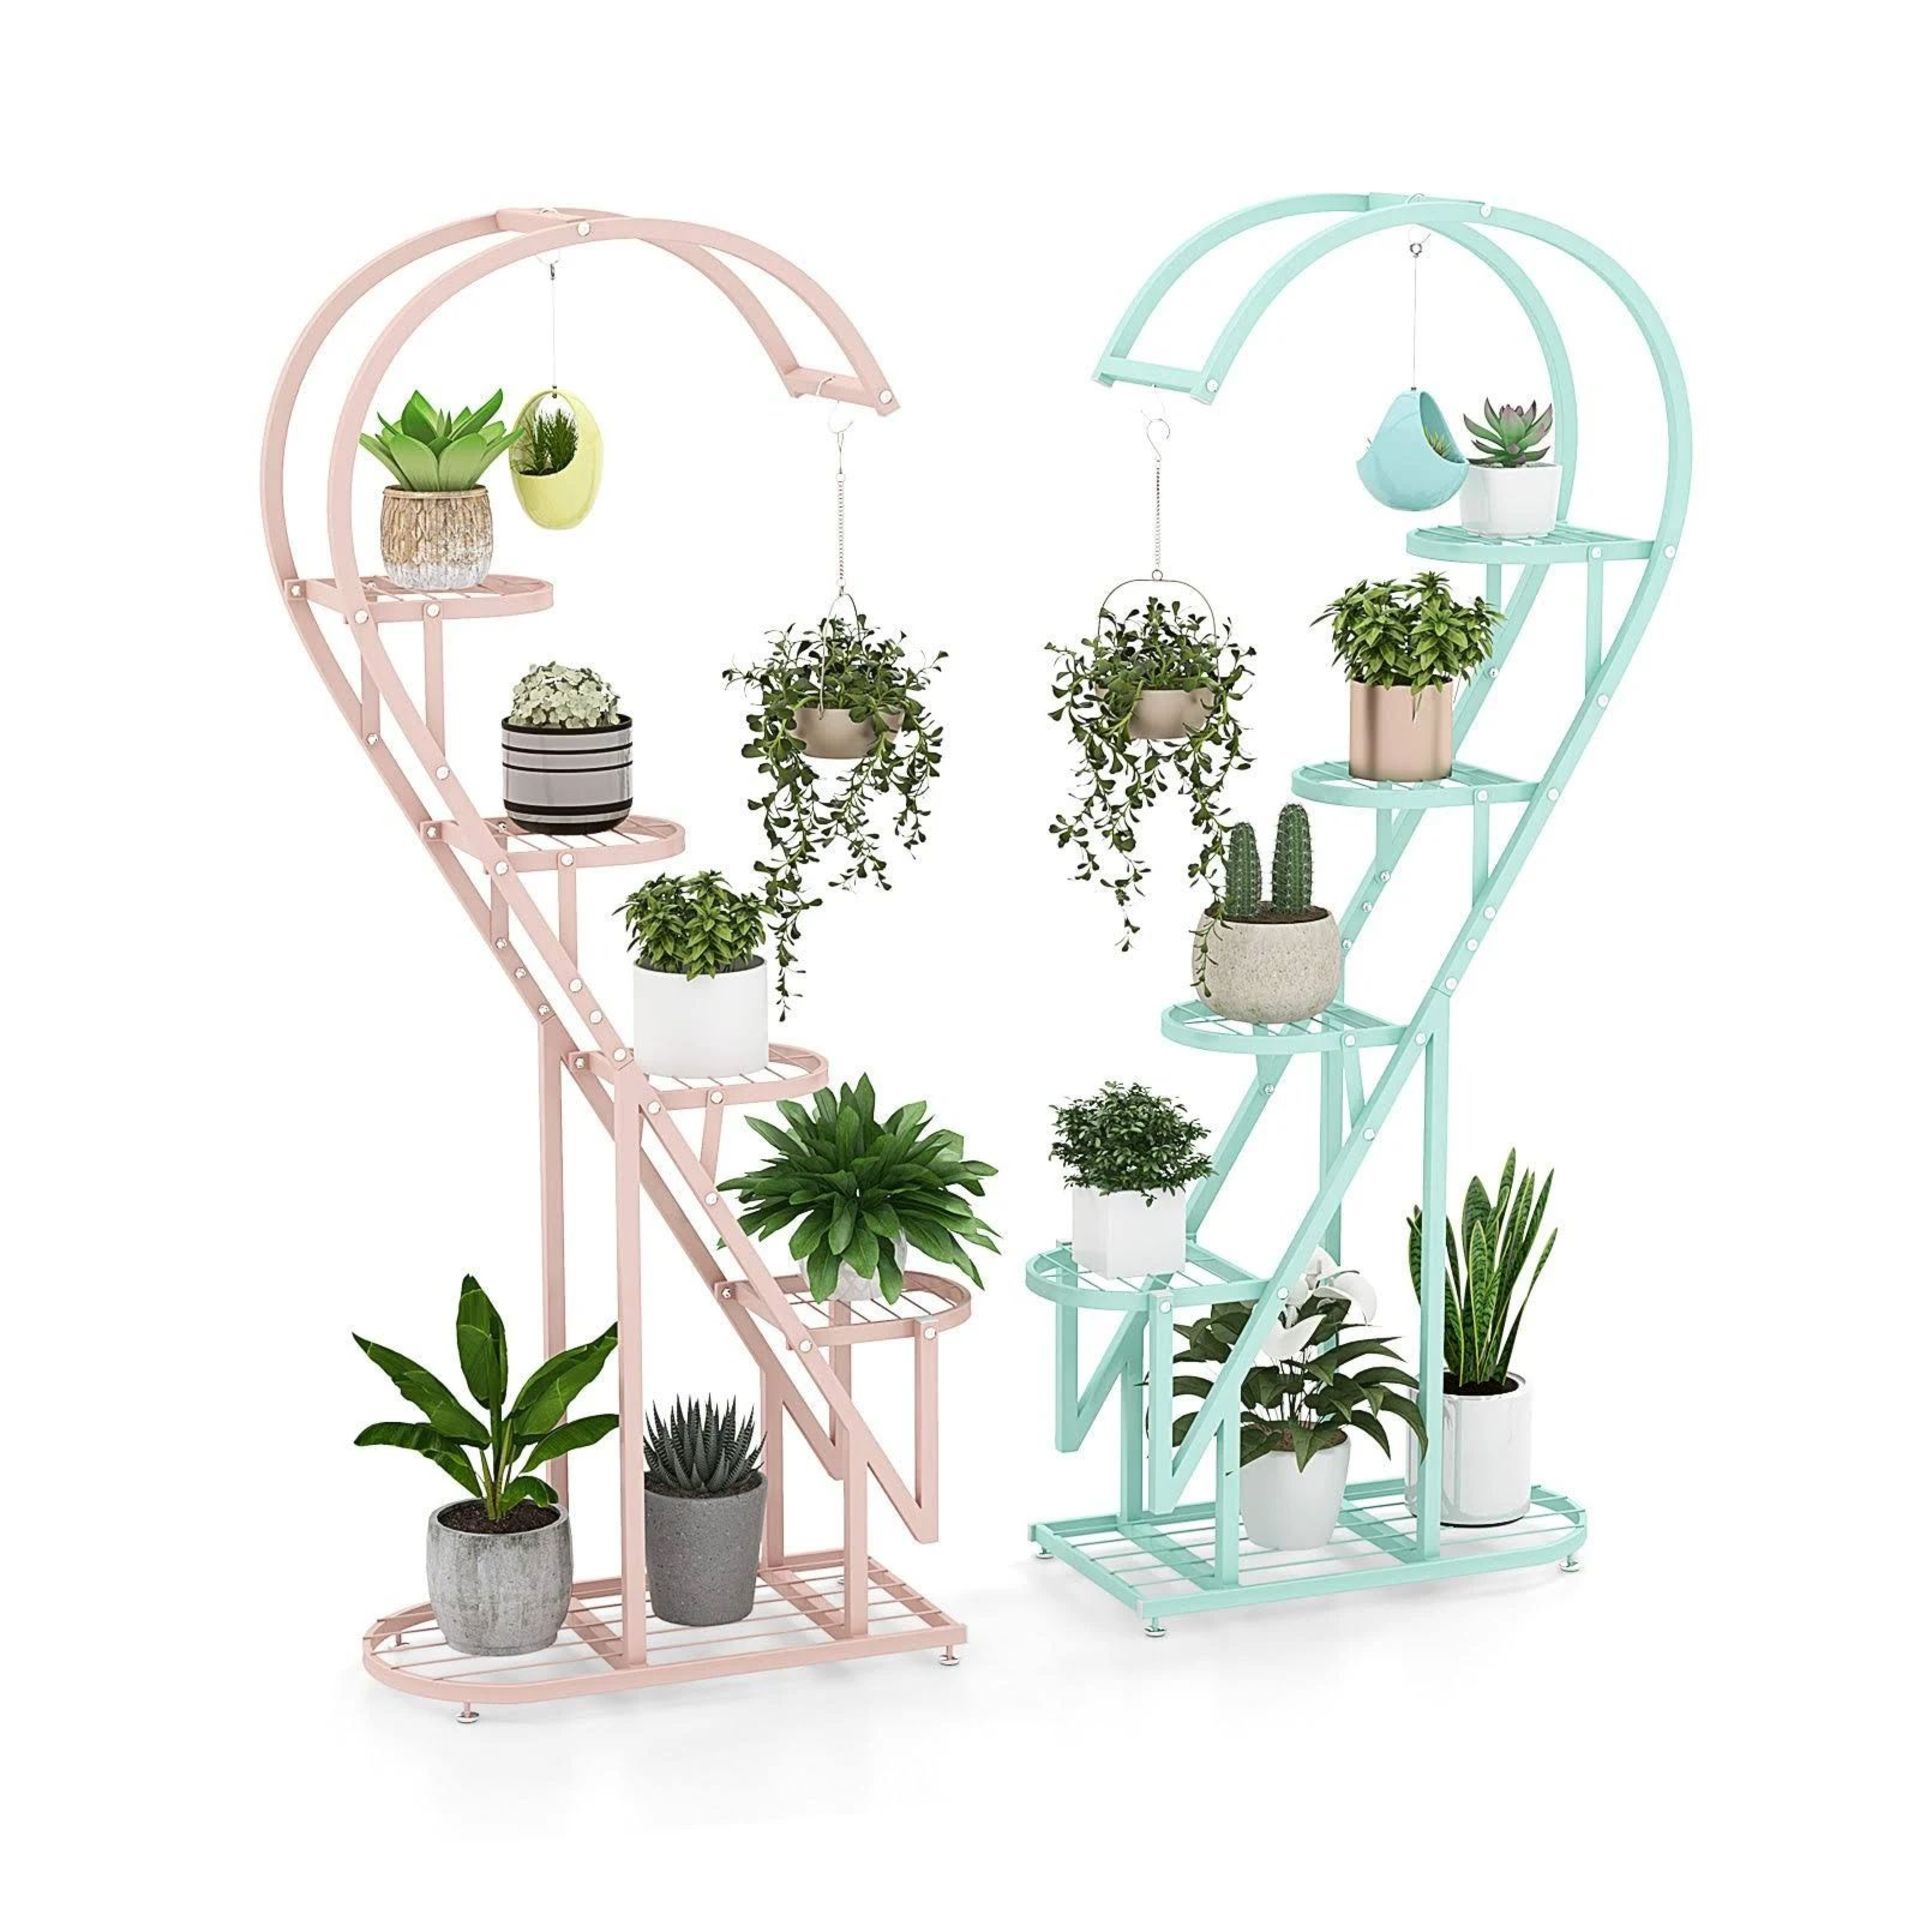 Deluxe 5 Tier Metal Plant Stand with Hanging Hook for Multiple Plants. - ER54.